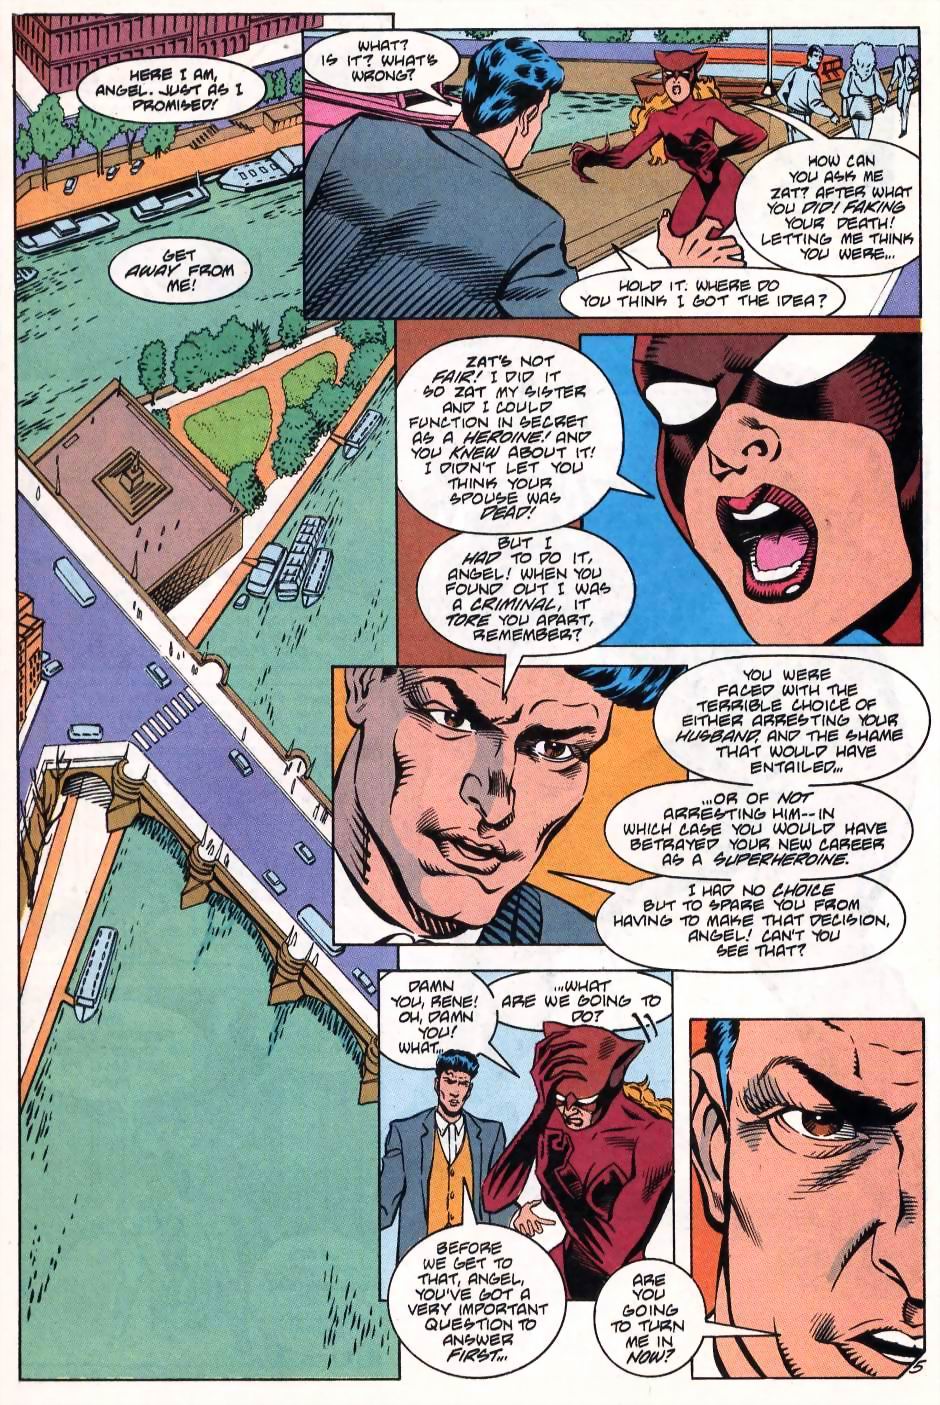 Justice League International (1993) 53 Page 5